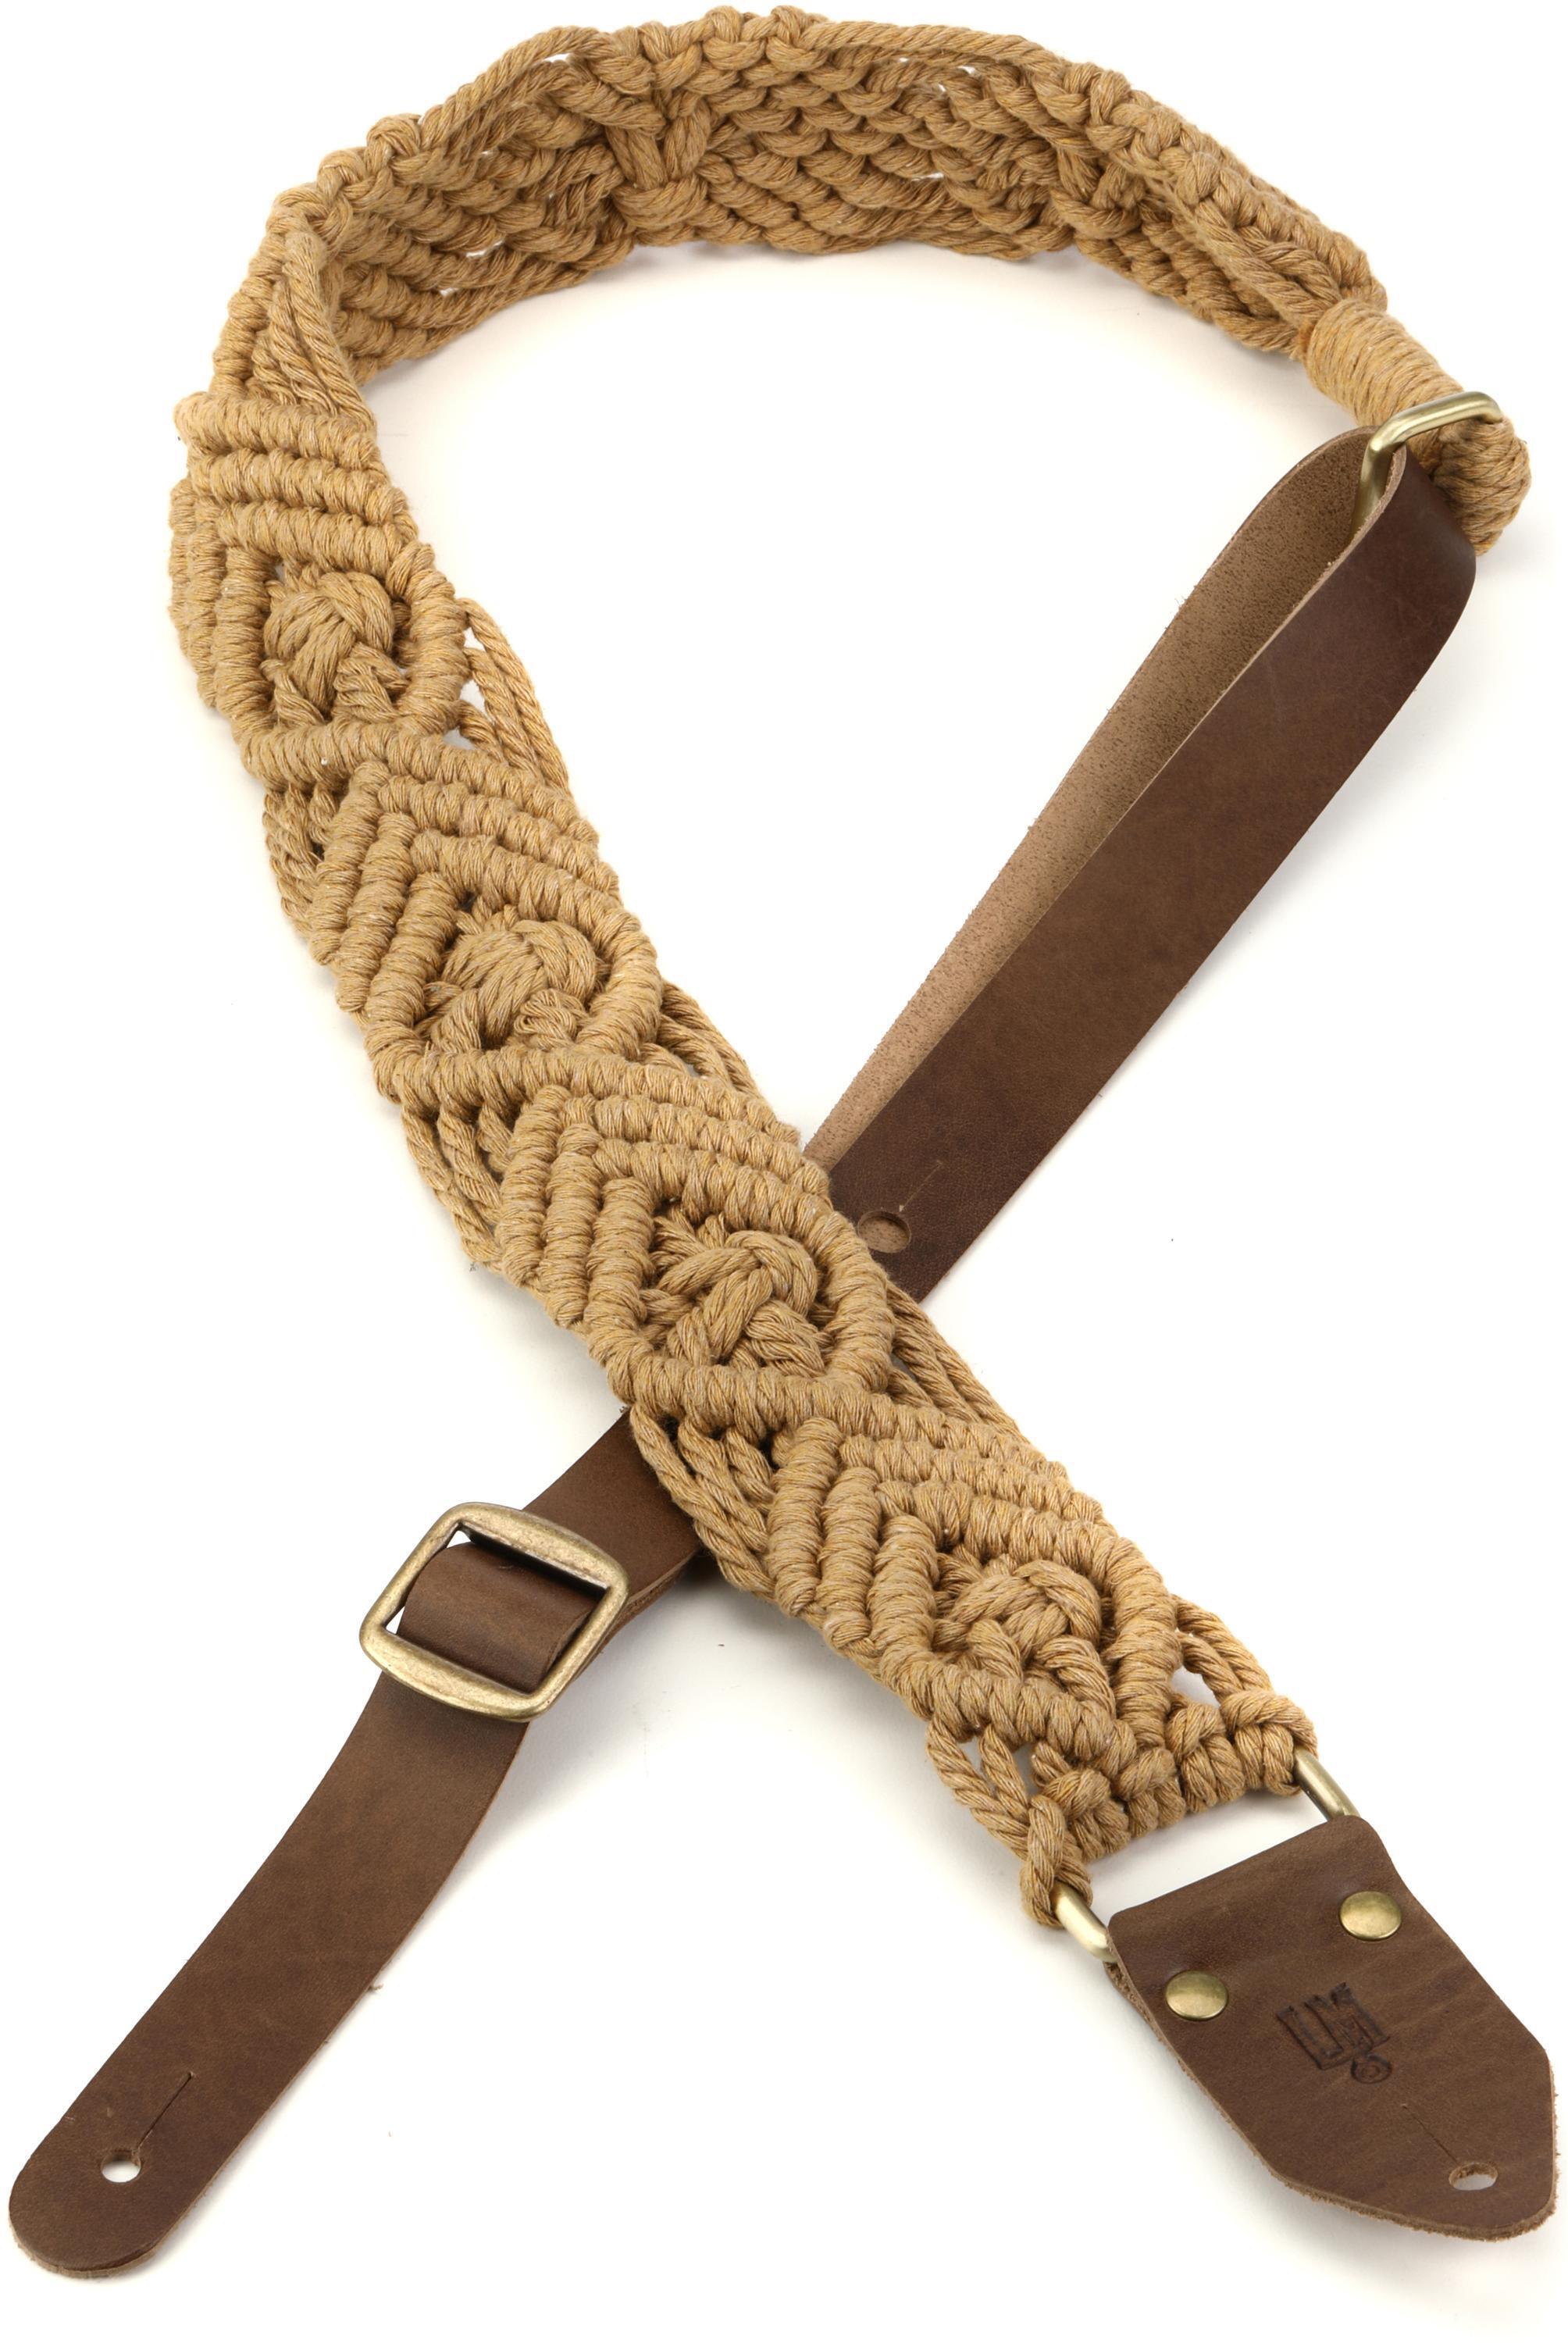 LM Products 2-inch Macrame Cotton Guitar Strap with Leather Ends